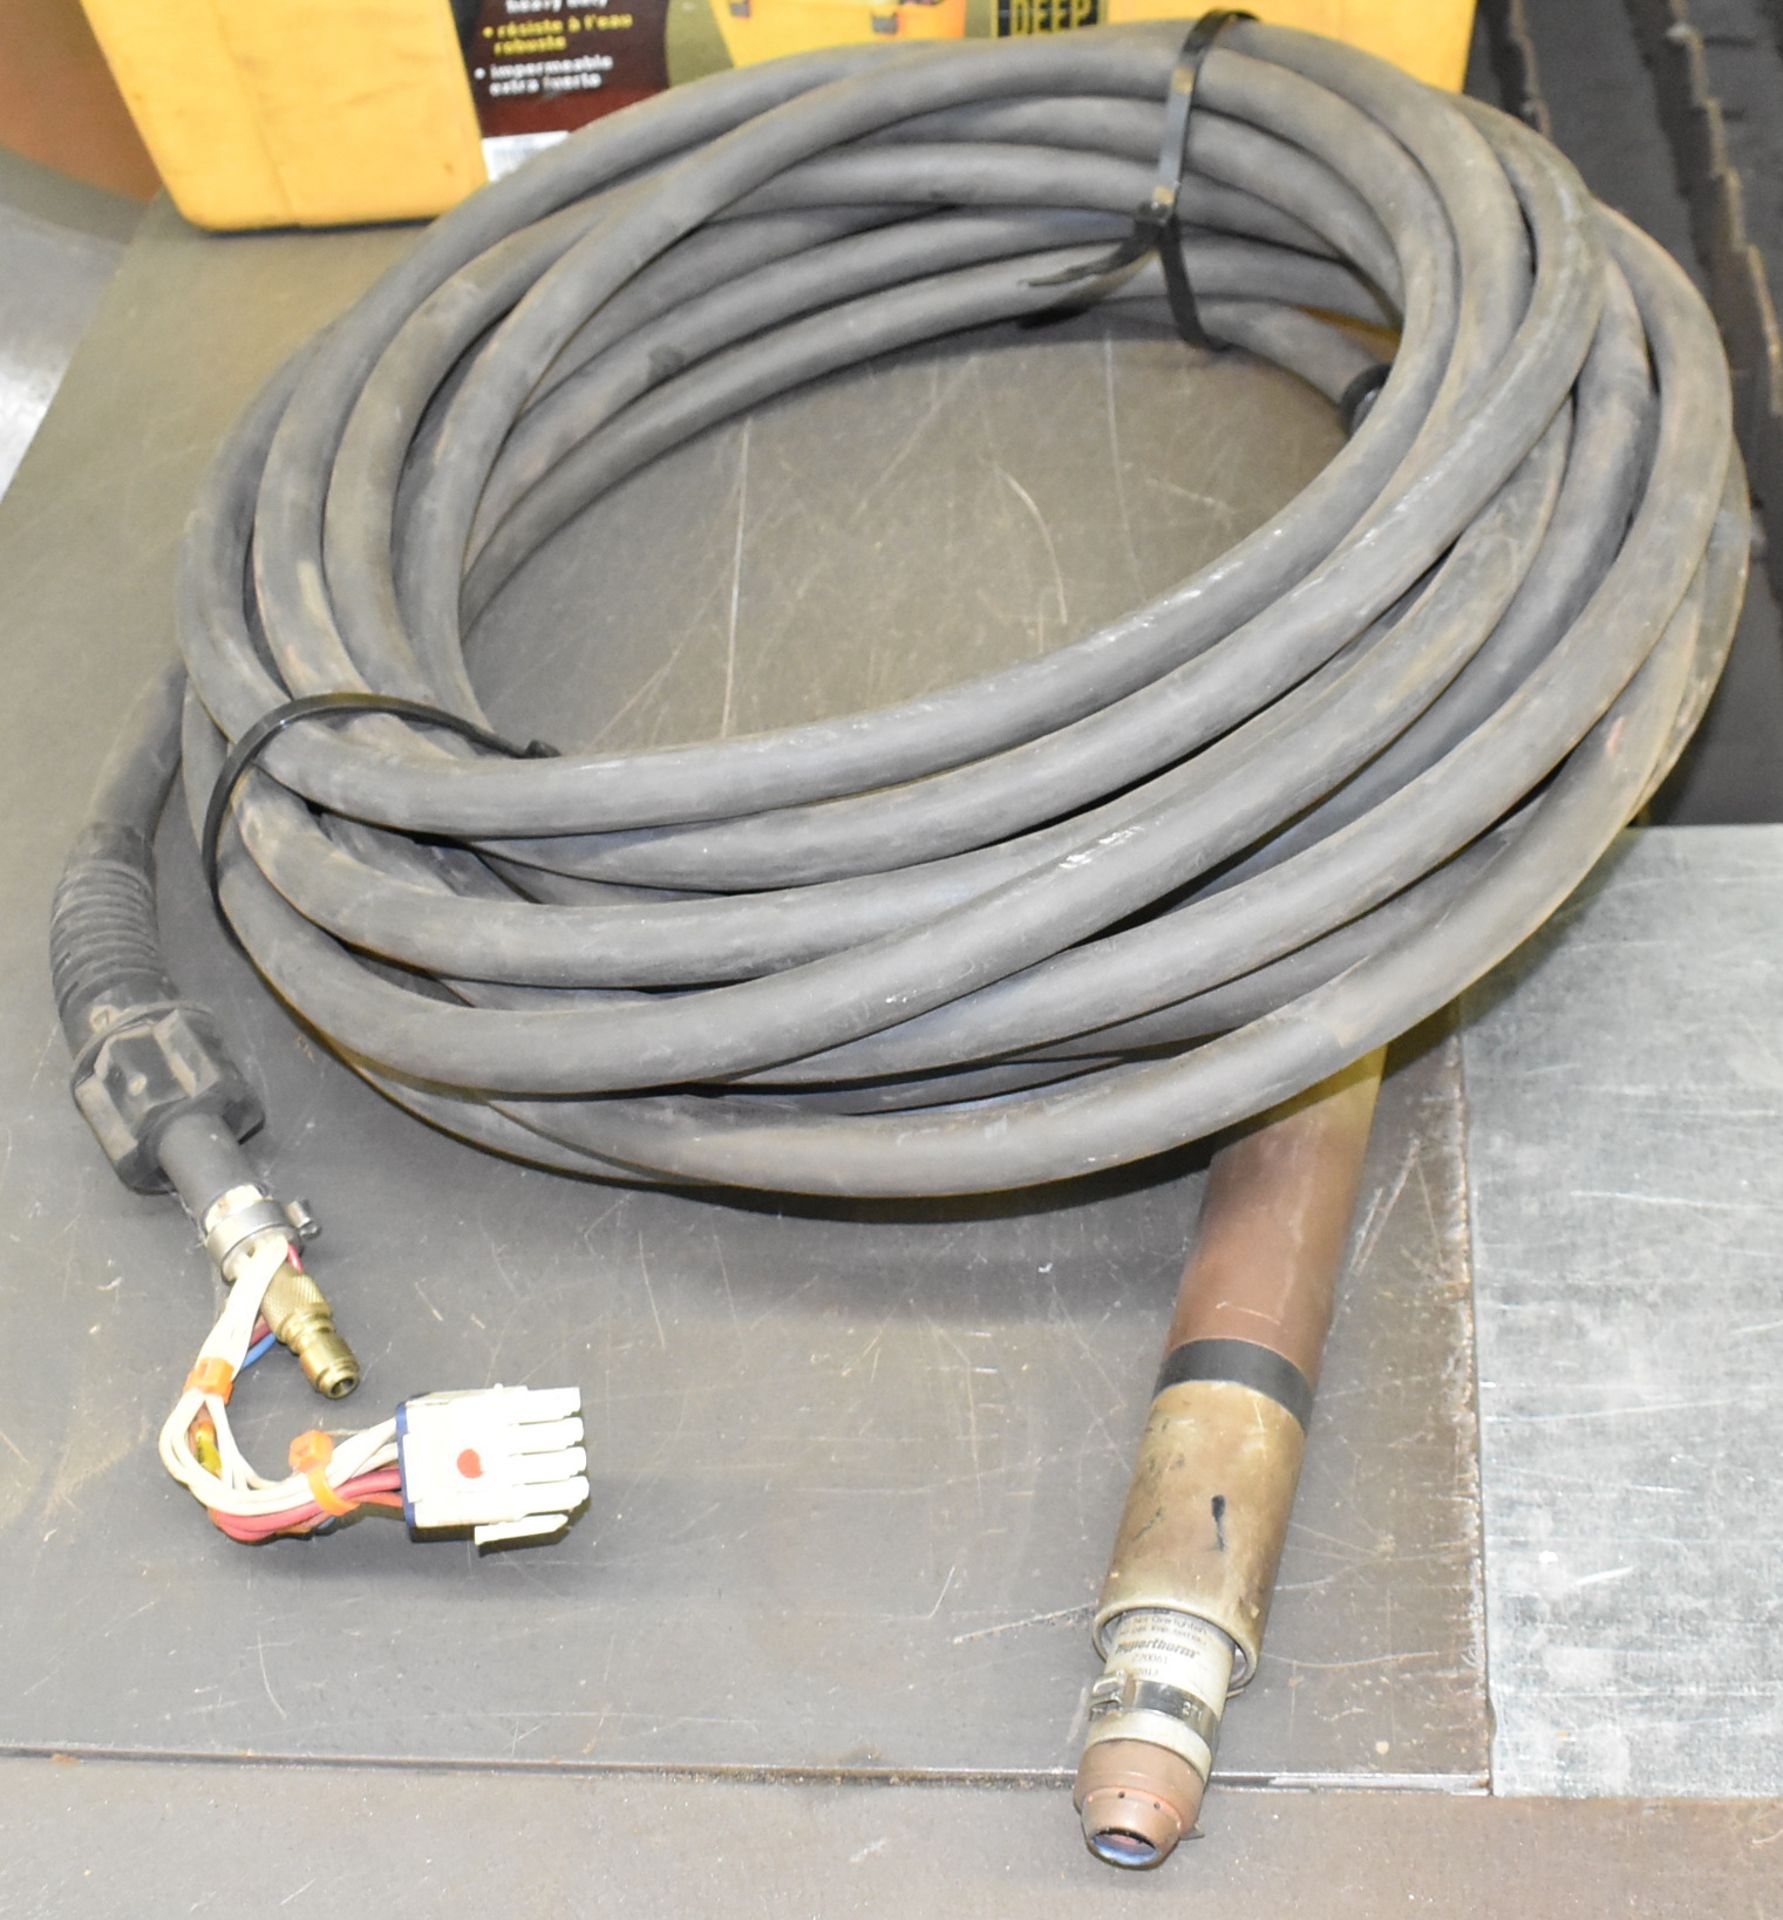 LOT/ Plasma cutting torch with consumables including torch tips - Image 3 of 3